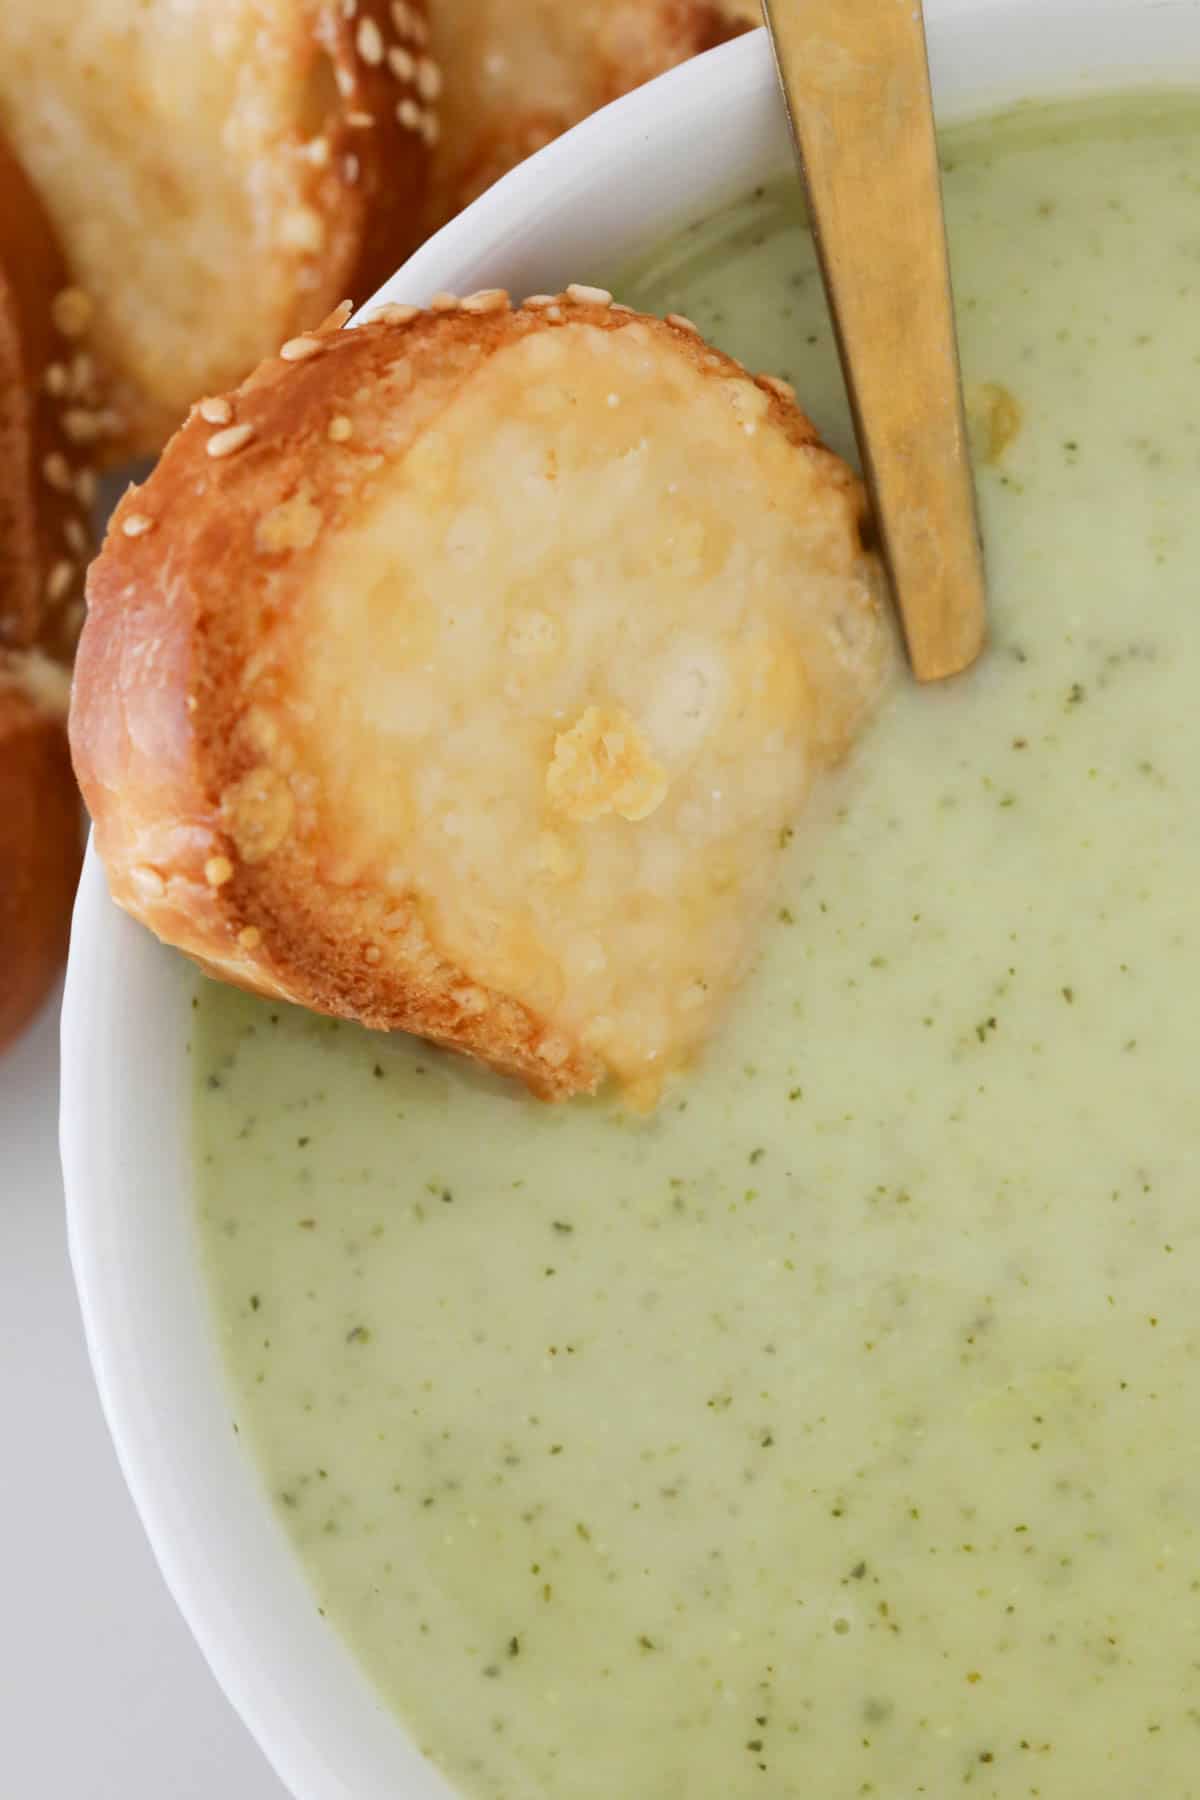 A piece of cheesy bread dipped into zucchini soup.